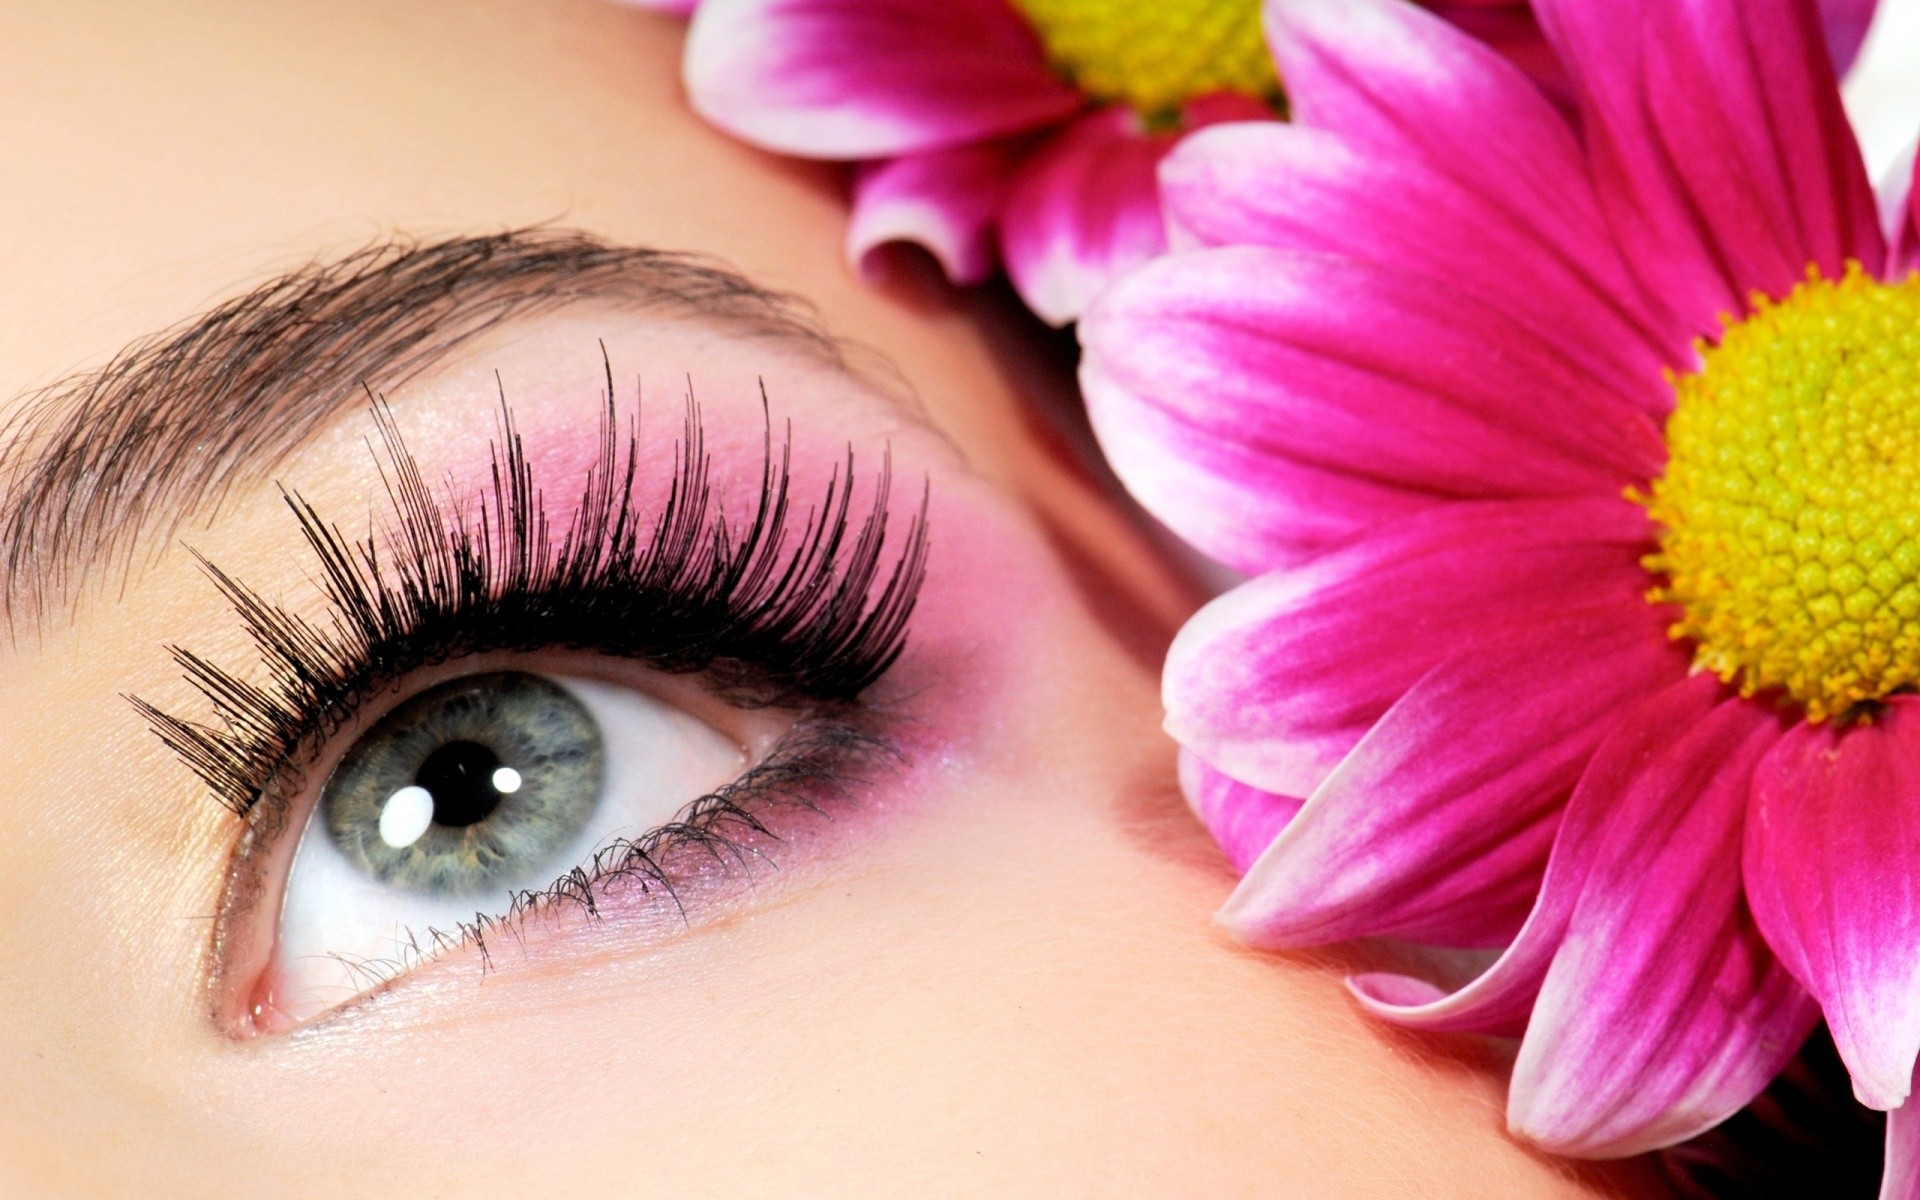 A woman's eye with long eyelashes and a pink flower next to it. - Makeup